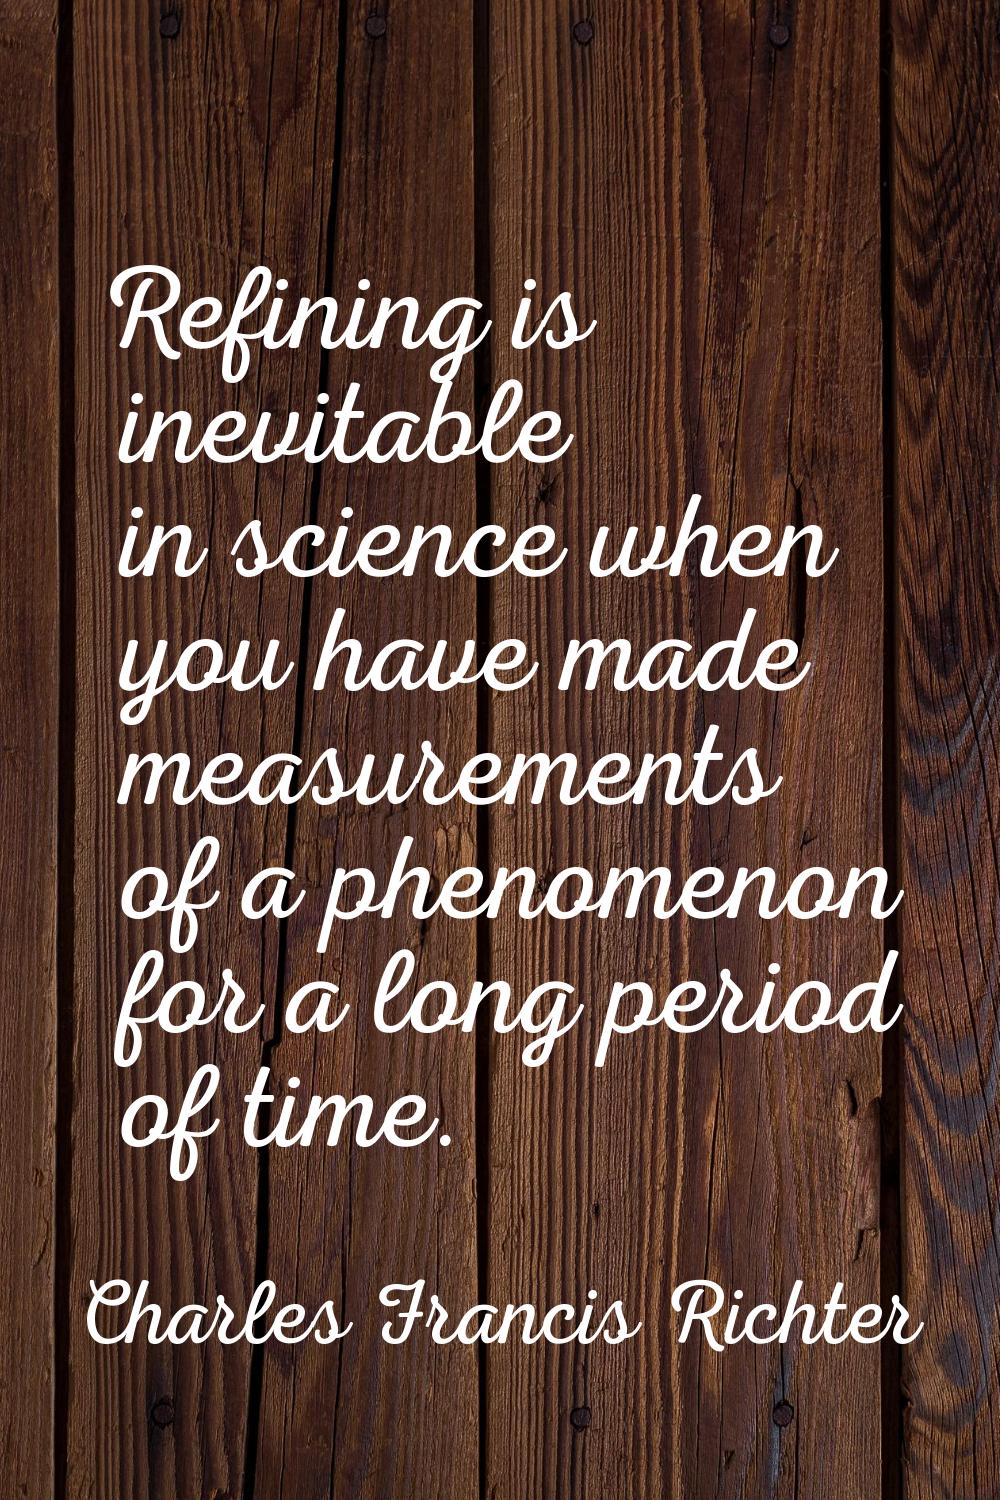 Refining is inevitable in science when you have made measurements of a phenomenon for a long period